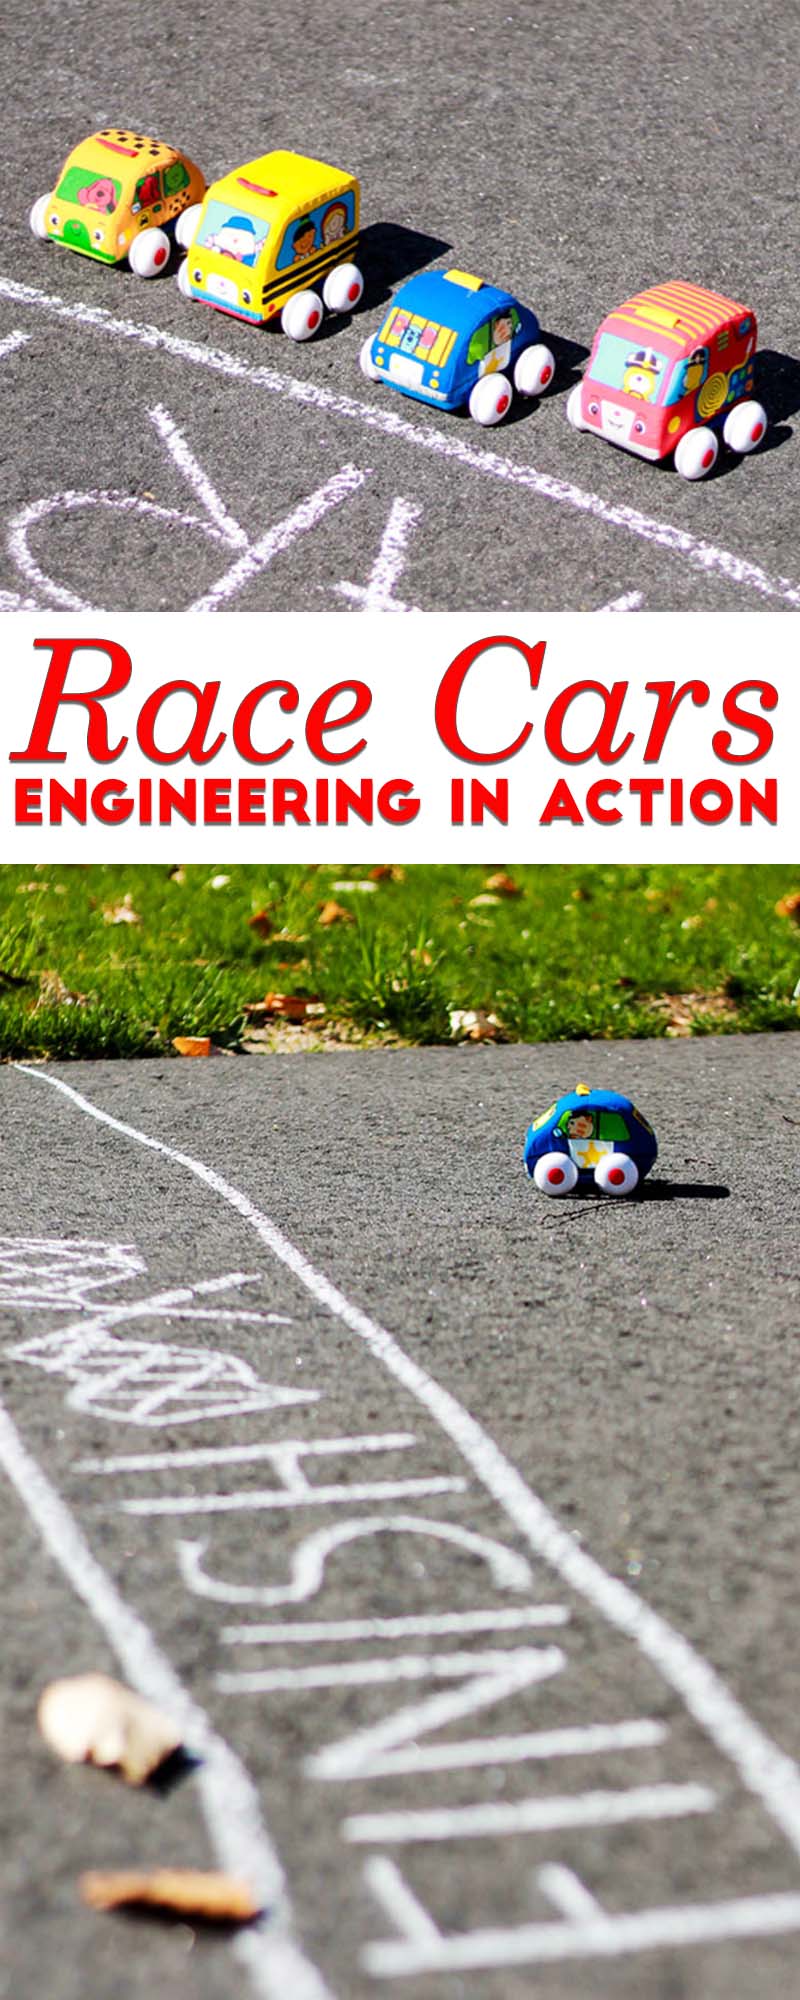 Learn some basic engineering with toys you already have... Race cars are great learning tools and demonstrate engineering in action. A fun, hands on, outdoor and active learning activity for toddlers and preschoolers | STEM | STEAM | Toddlers | Preschool | Engineering for Kids | Totschool | Outdoor Fun | Kids Activity